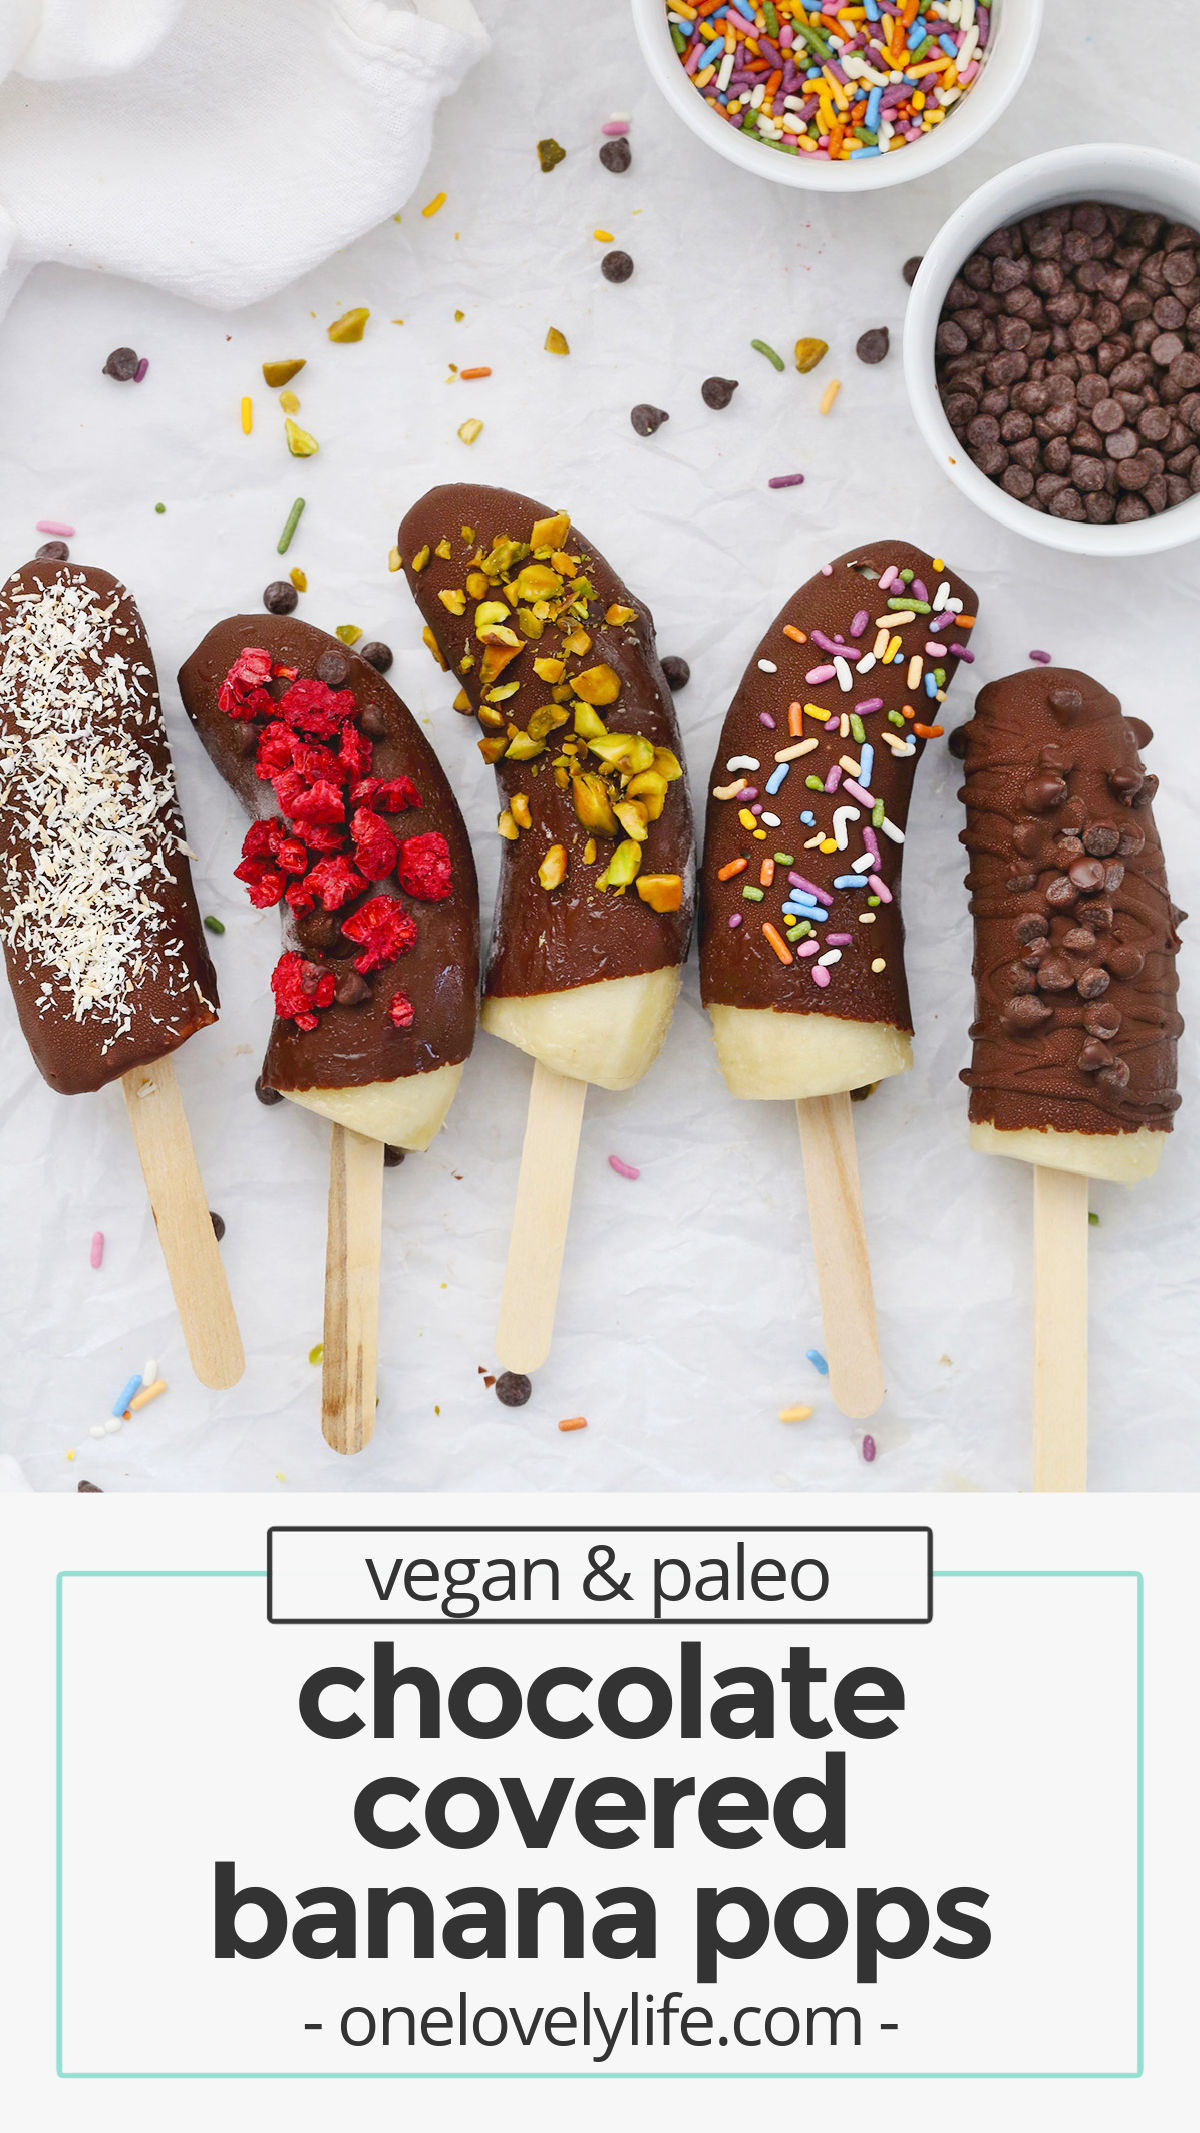 Healthy Chocolate Covered Bananas - These chocolate-dipped bananas are a delicious healthy snack or healthy dessert. Plus, they're gluten-free, vegan & paleo! // Chocolate Covered Banana Pops // Frozen Chocolate Bananas // chocolate dipped banana pops // healthy snack / healthy dessert / disneyland frozen bananas / healthy treat / healthy popsicle / kid friendly snack / summer snack / frozen bananas / paleo / vegan / gluten free